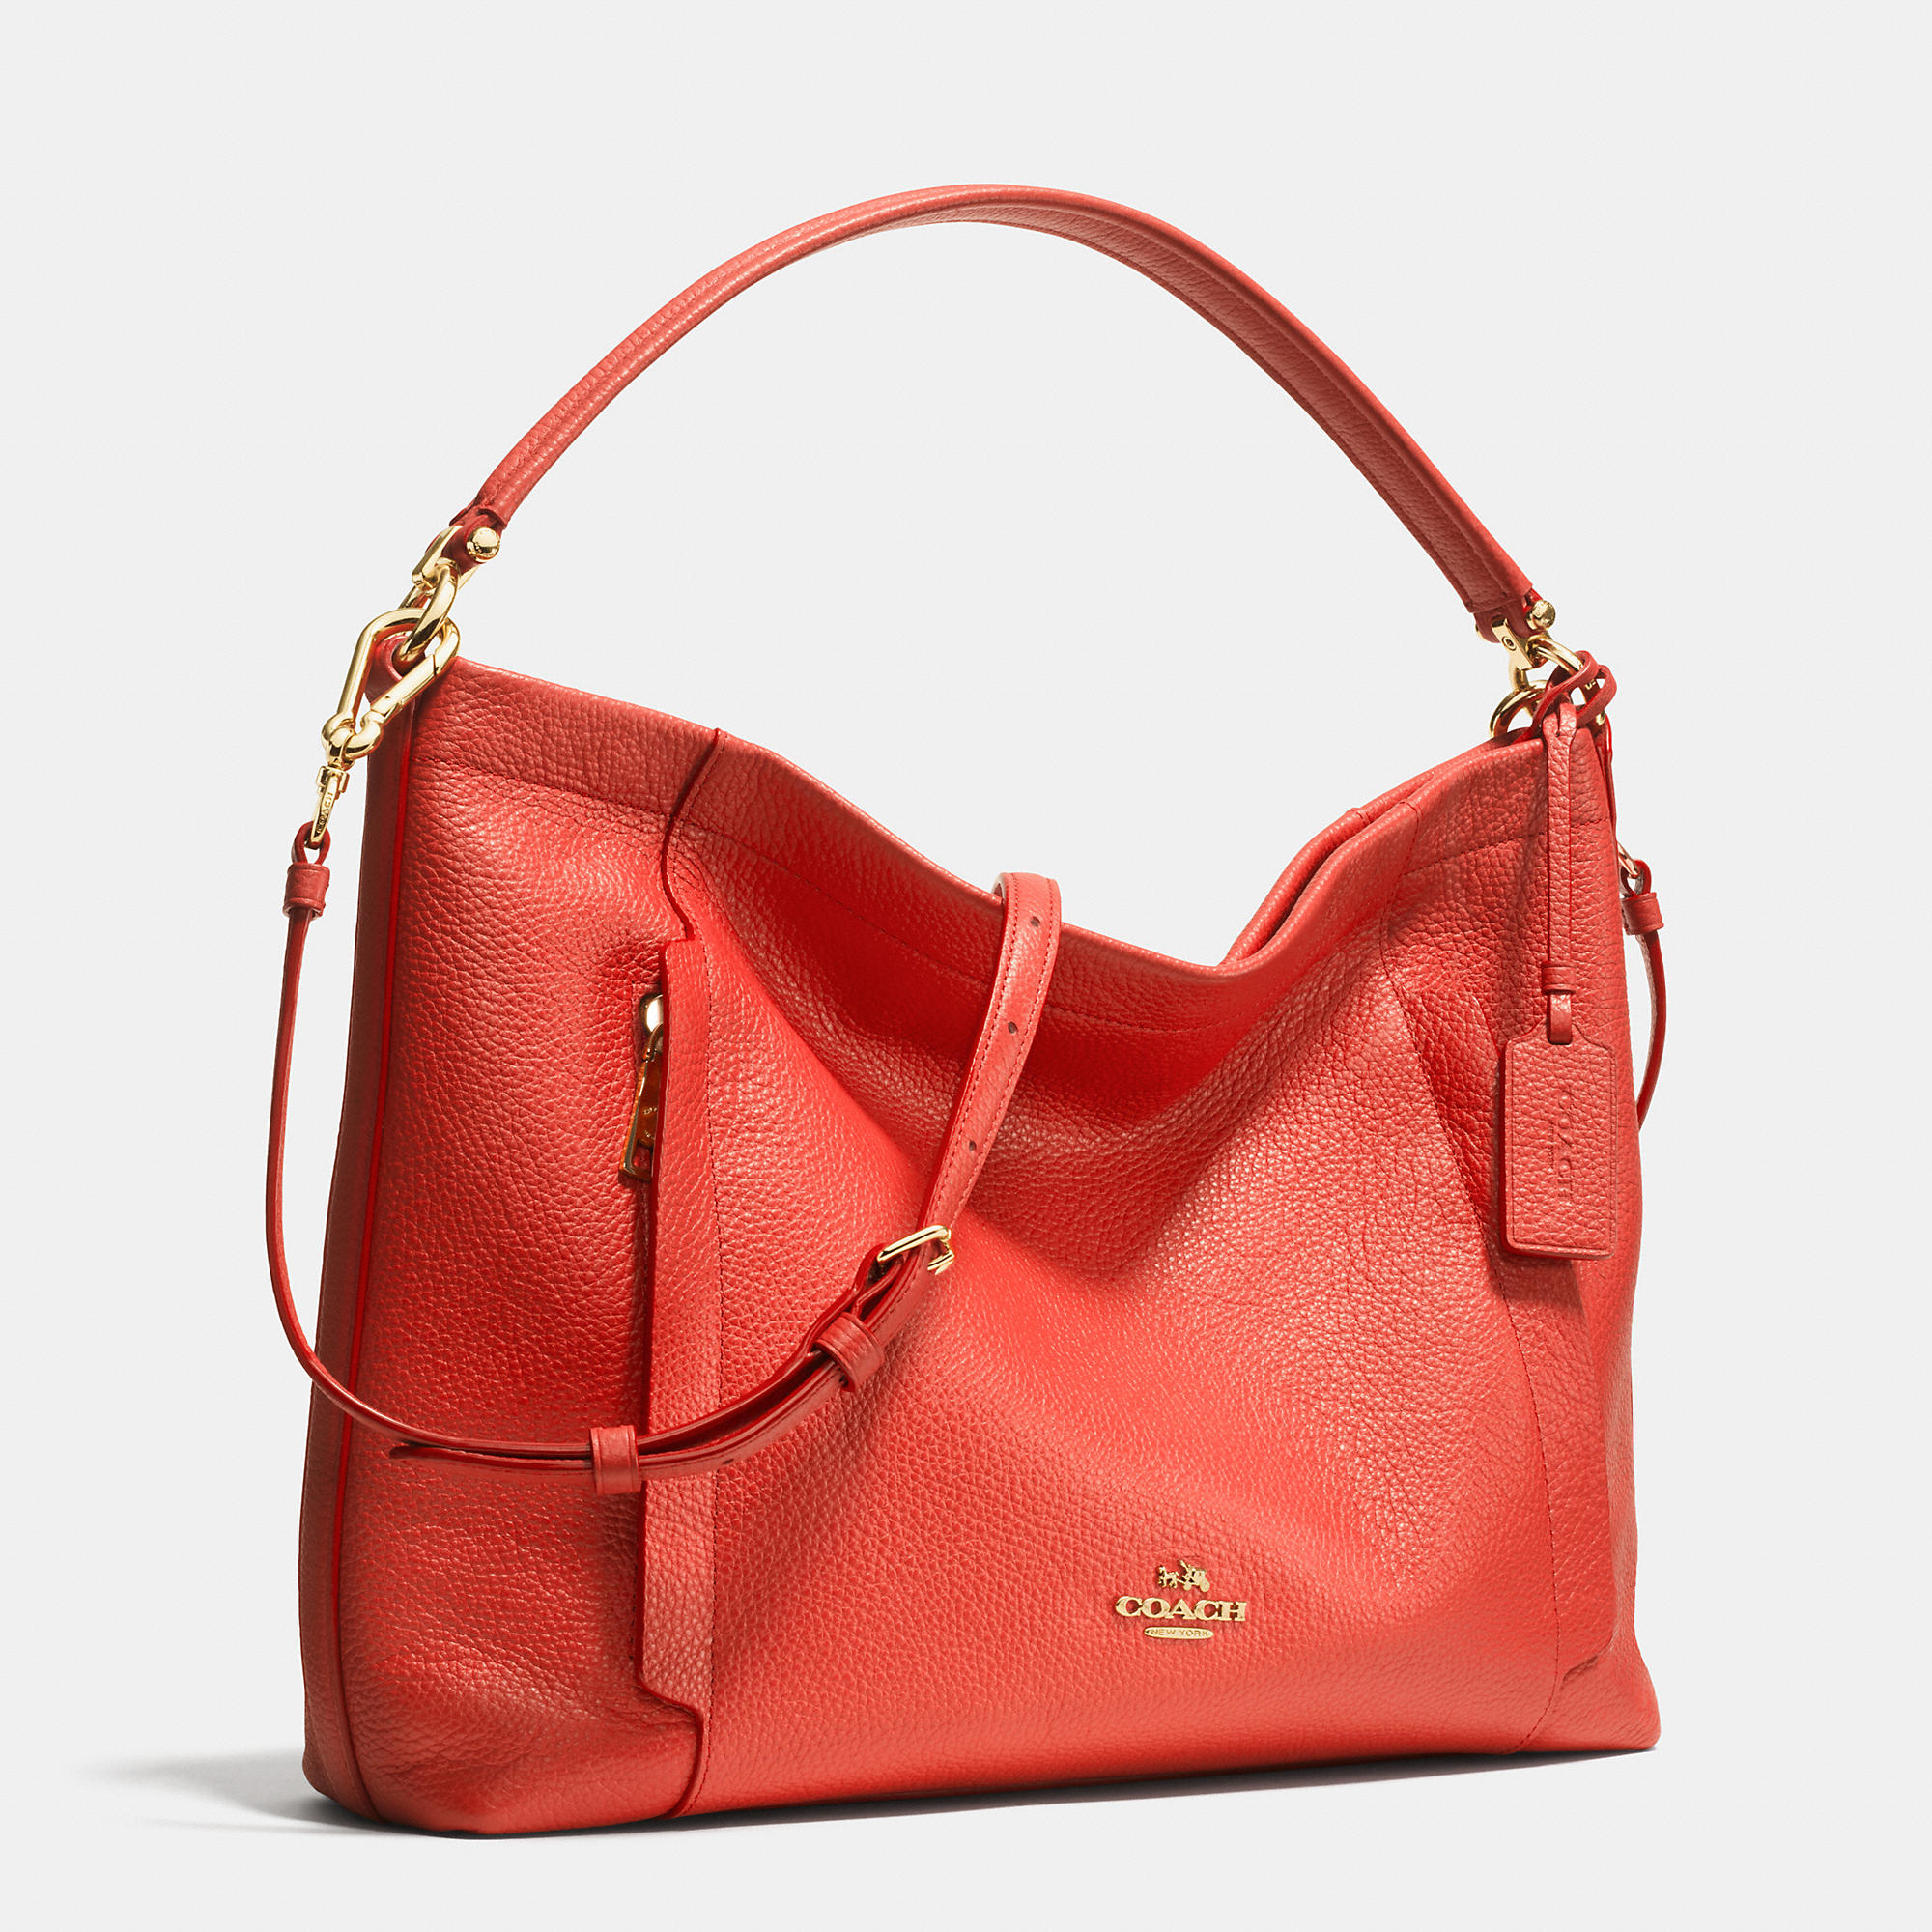 COACH Scout Hobo In Pebble Leather in Light Gold/Oxblood (Black) - Lyst